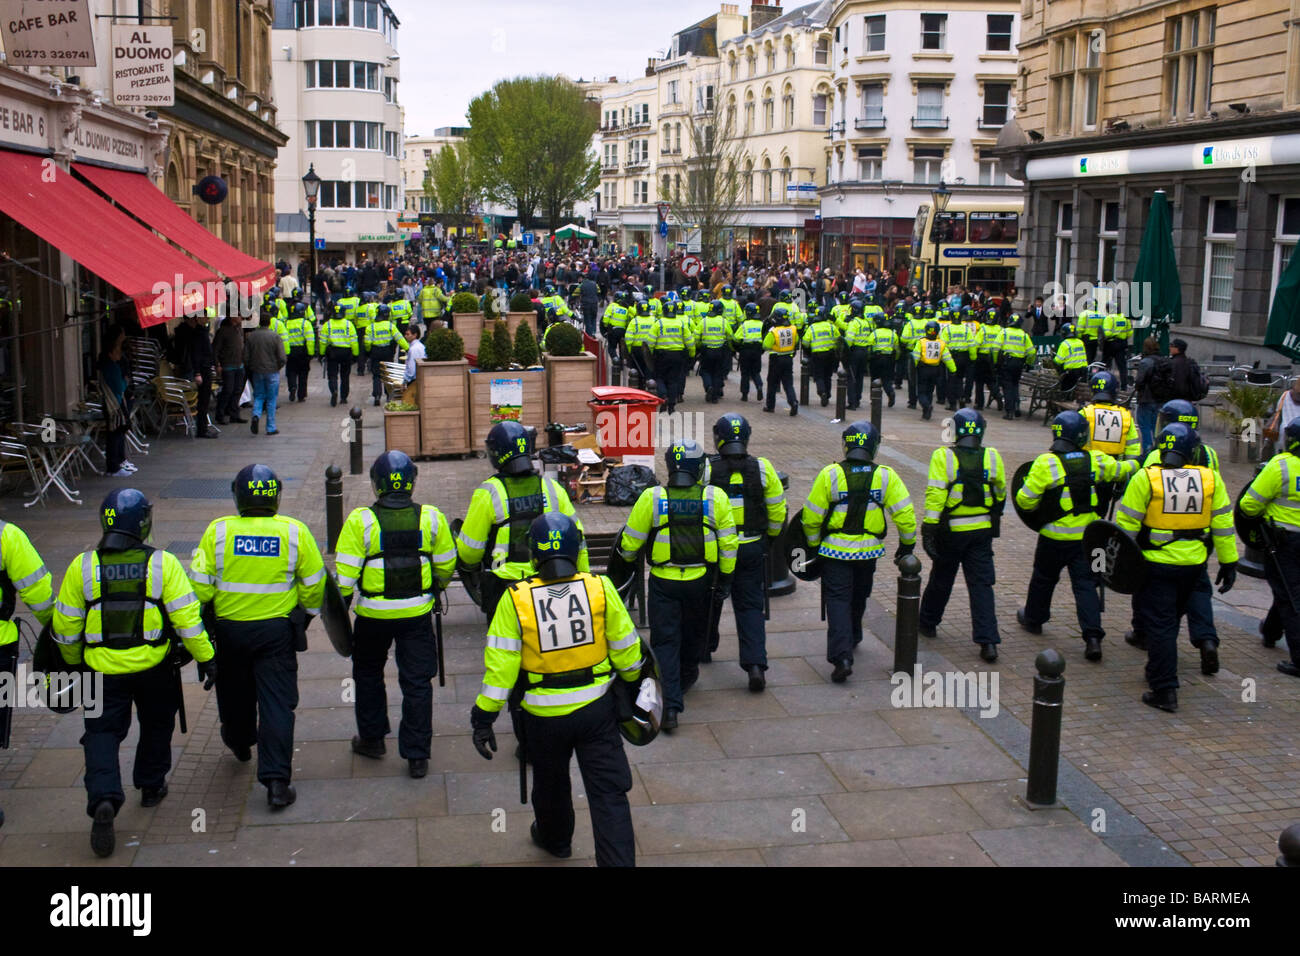 Lines of riot police contain crowds during may day protests in Brighton, Sussex, UK JPH0194 Stock Photo